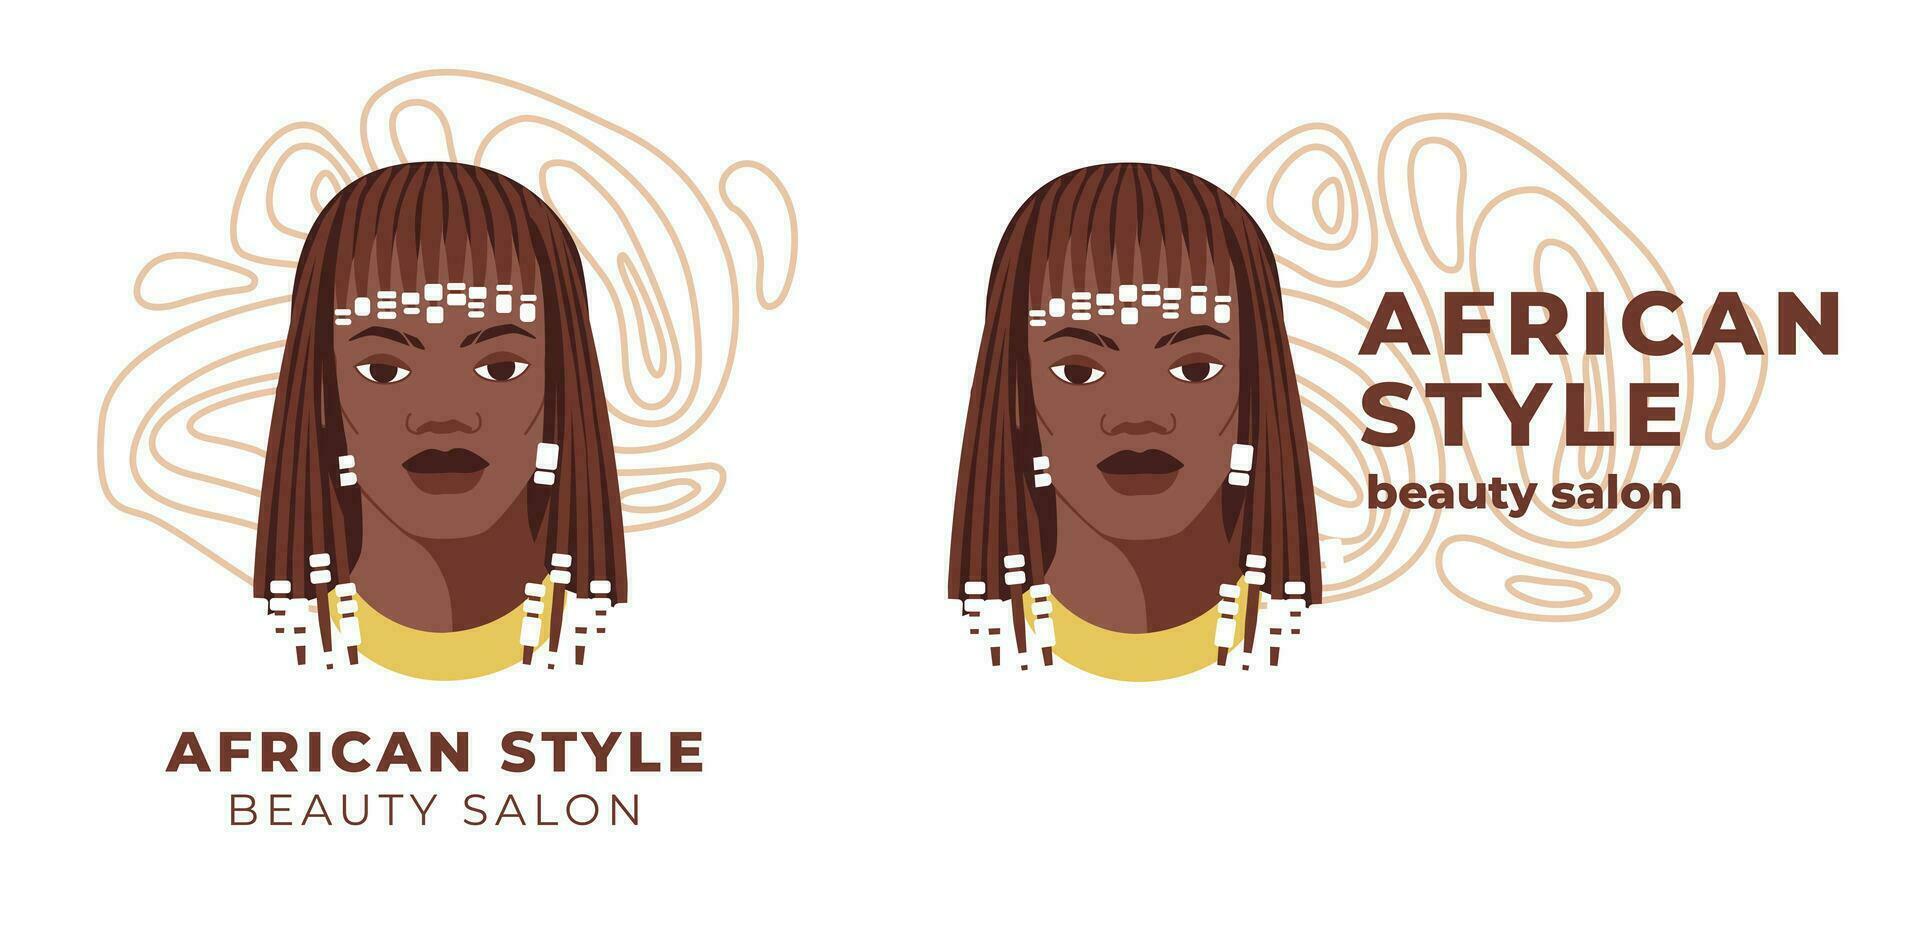 Beauty salon logo and identity. Flat vector illustration of black women face. Great for avatars, beauty salons, traditional curly hairstyles of African American women.